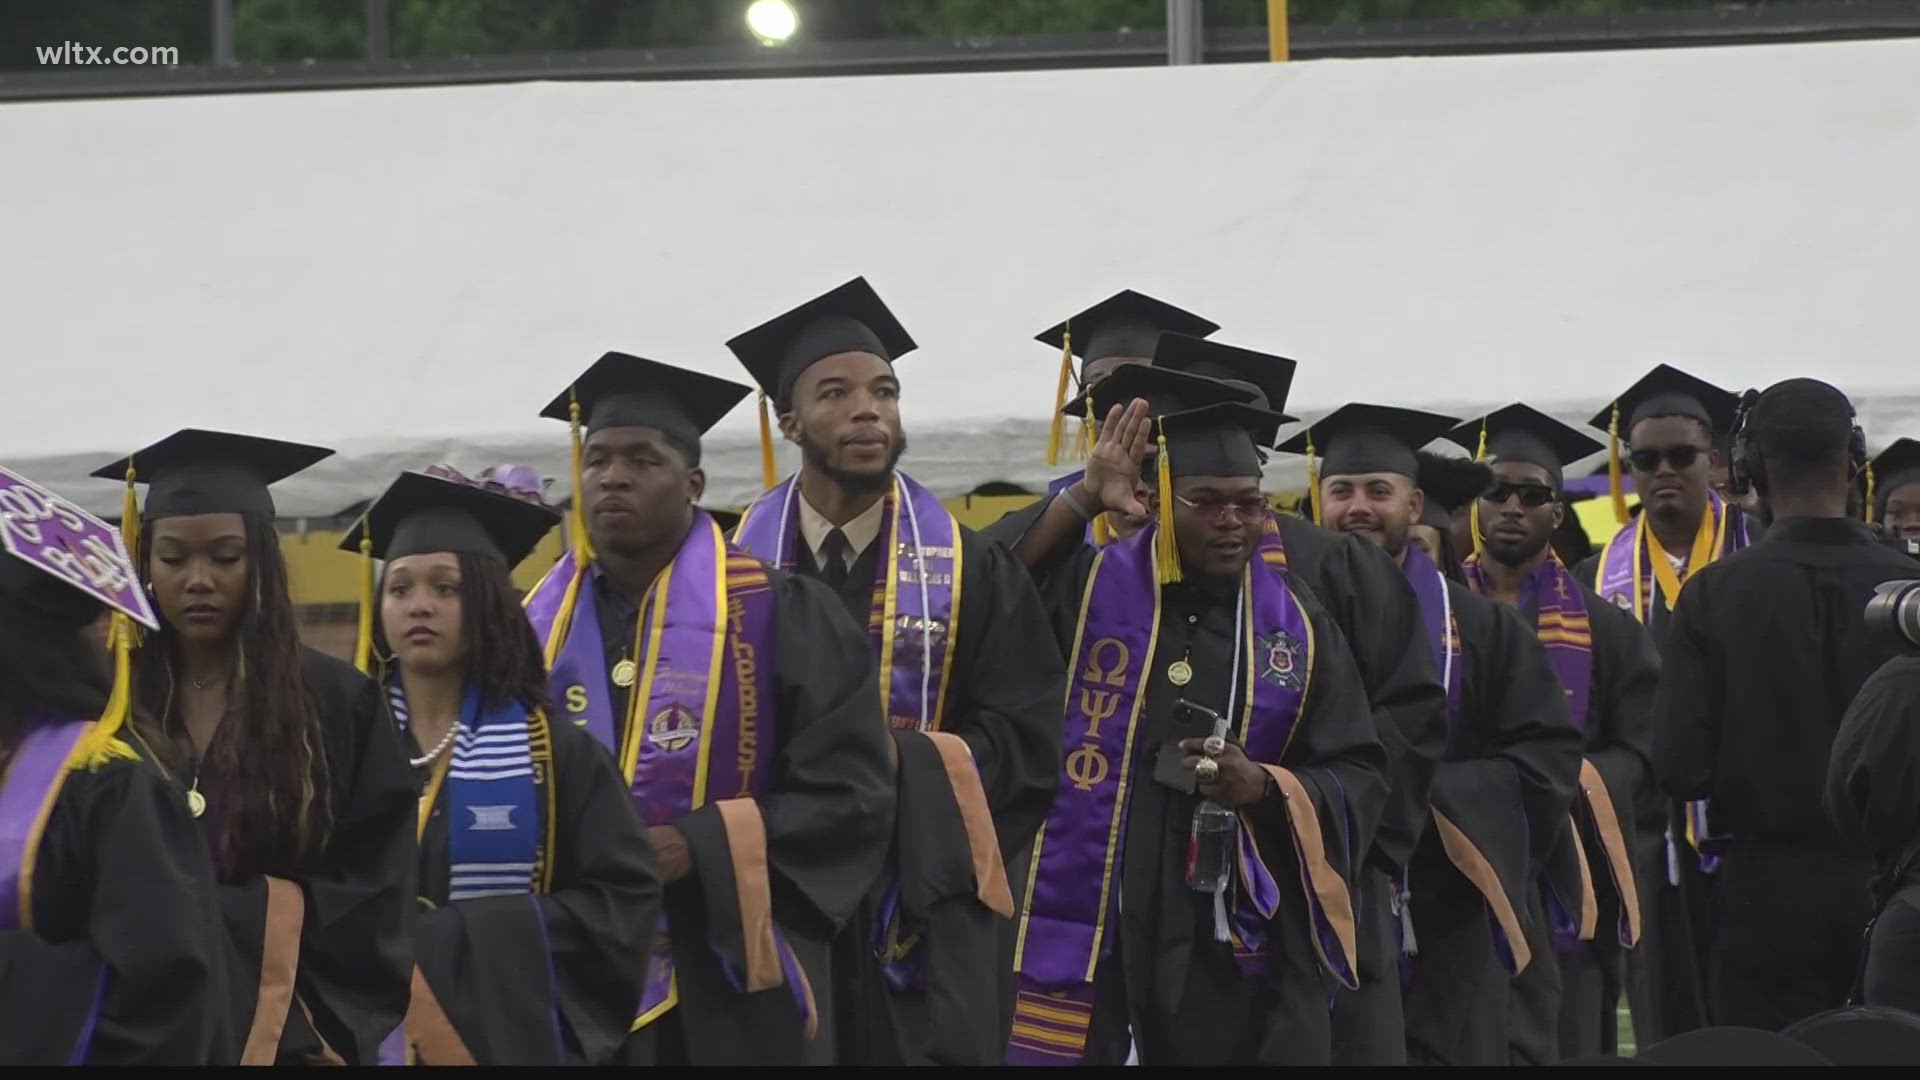 With Benedict College and the University of South Carolina having graduations in the same weekend in Columbia businesses are expecting a big rush.